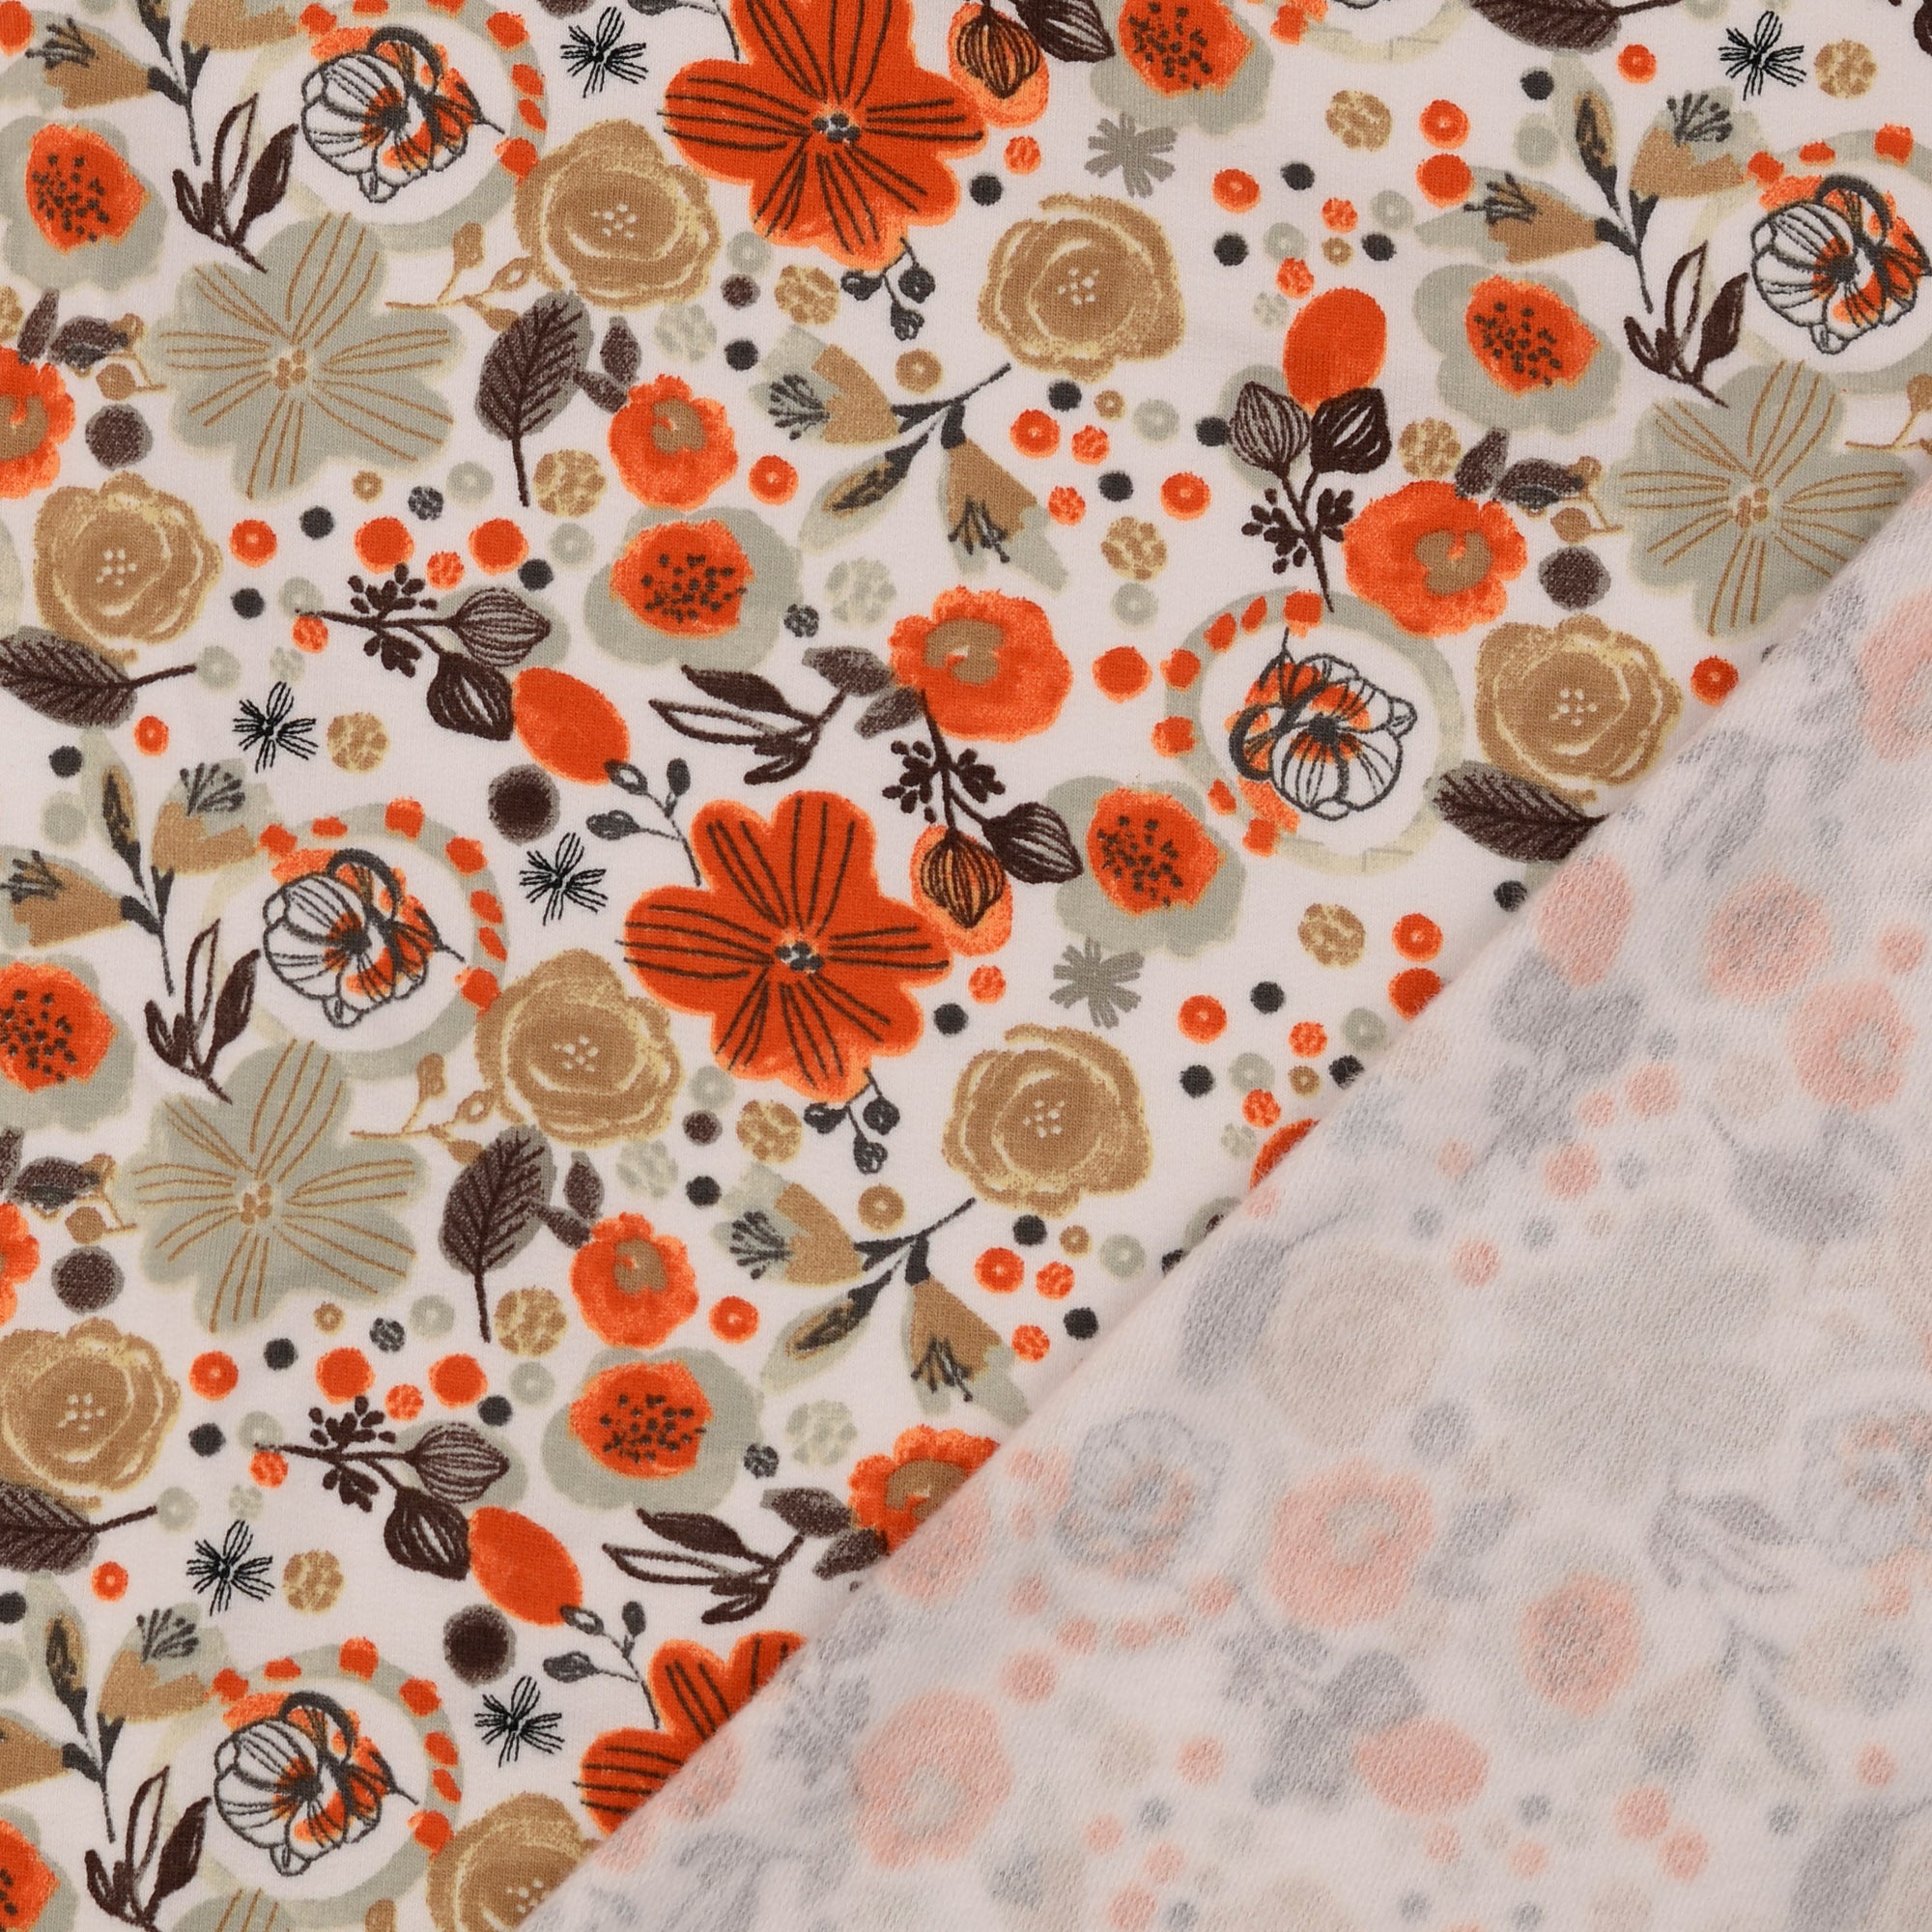 REMNANT 1.95 Metres - Floral Sketch Peach Soft Cotton Sweat-shirting Fabric in Ecru